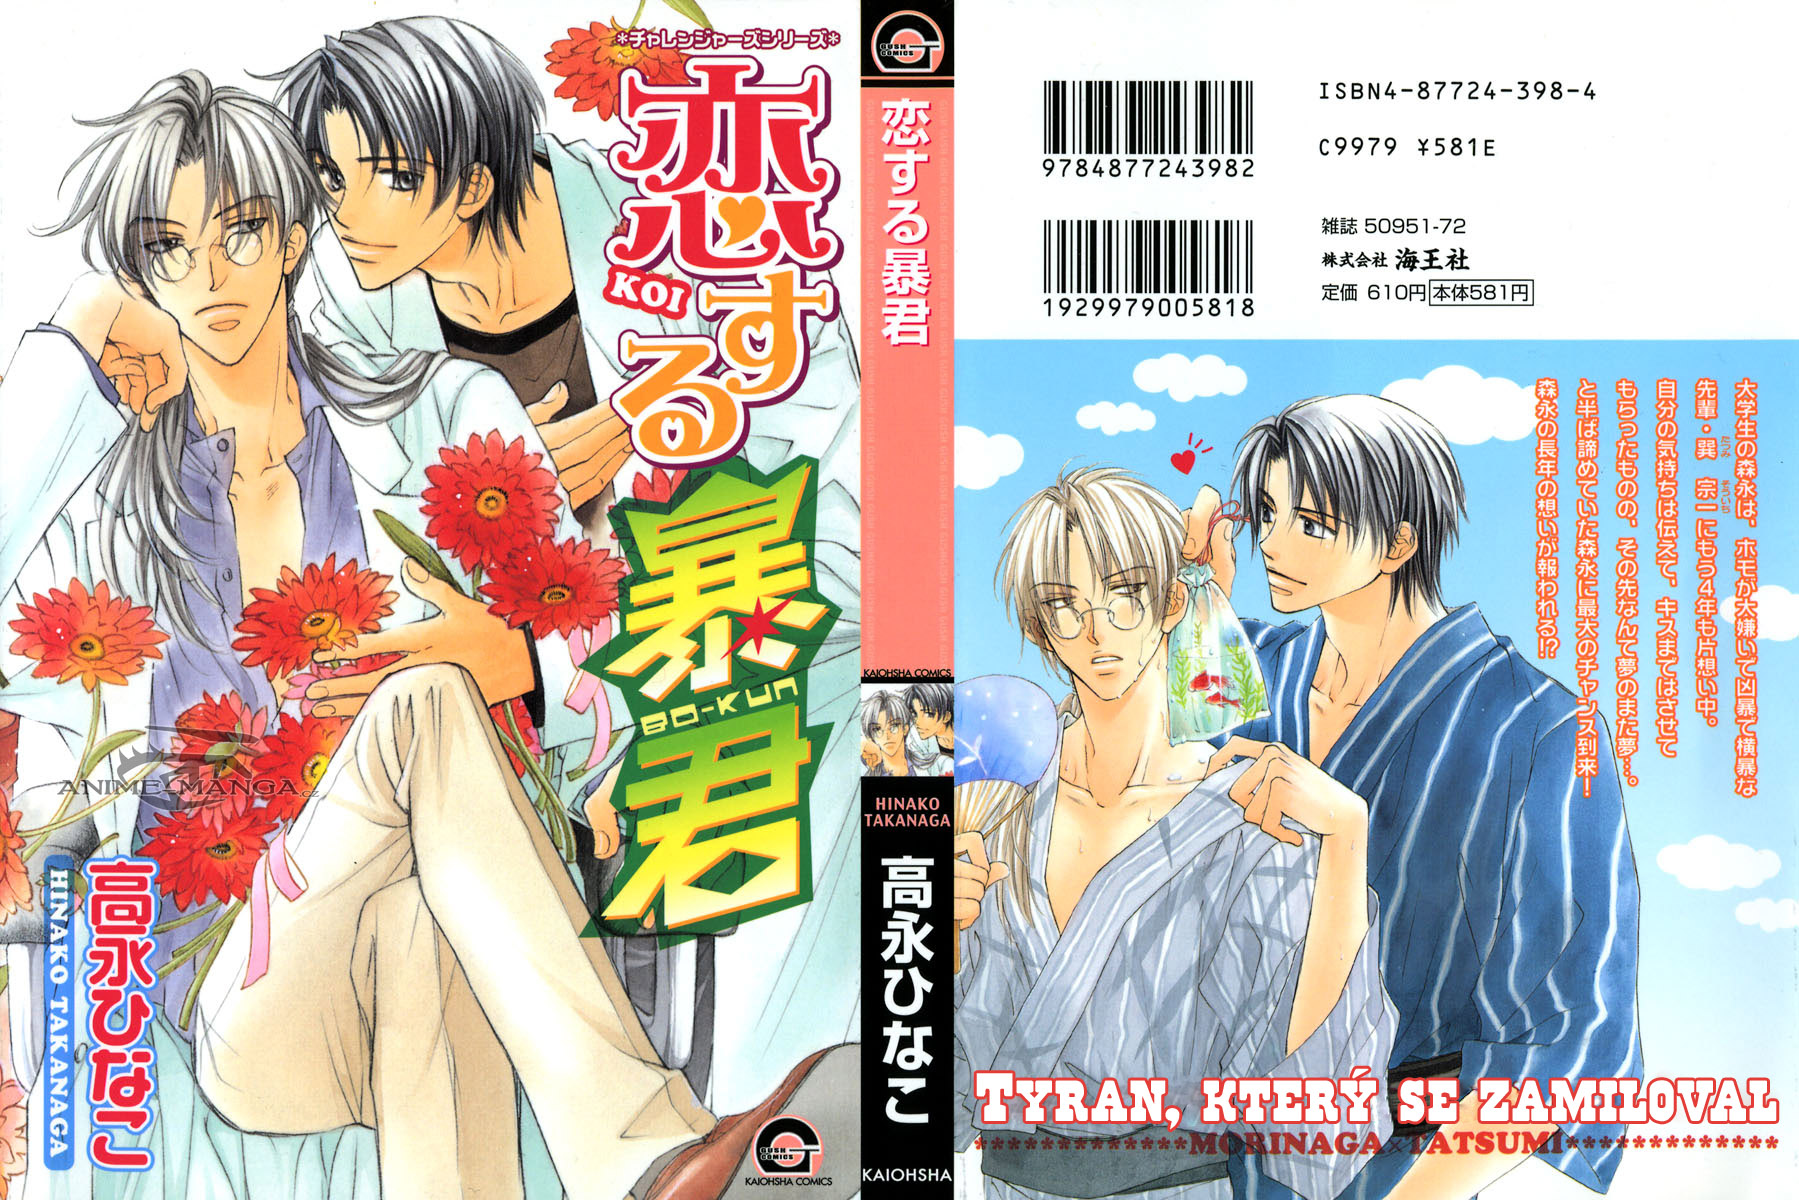 The Tyrant Who Fall in Love v01 - 000 - Cover.jpg